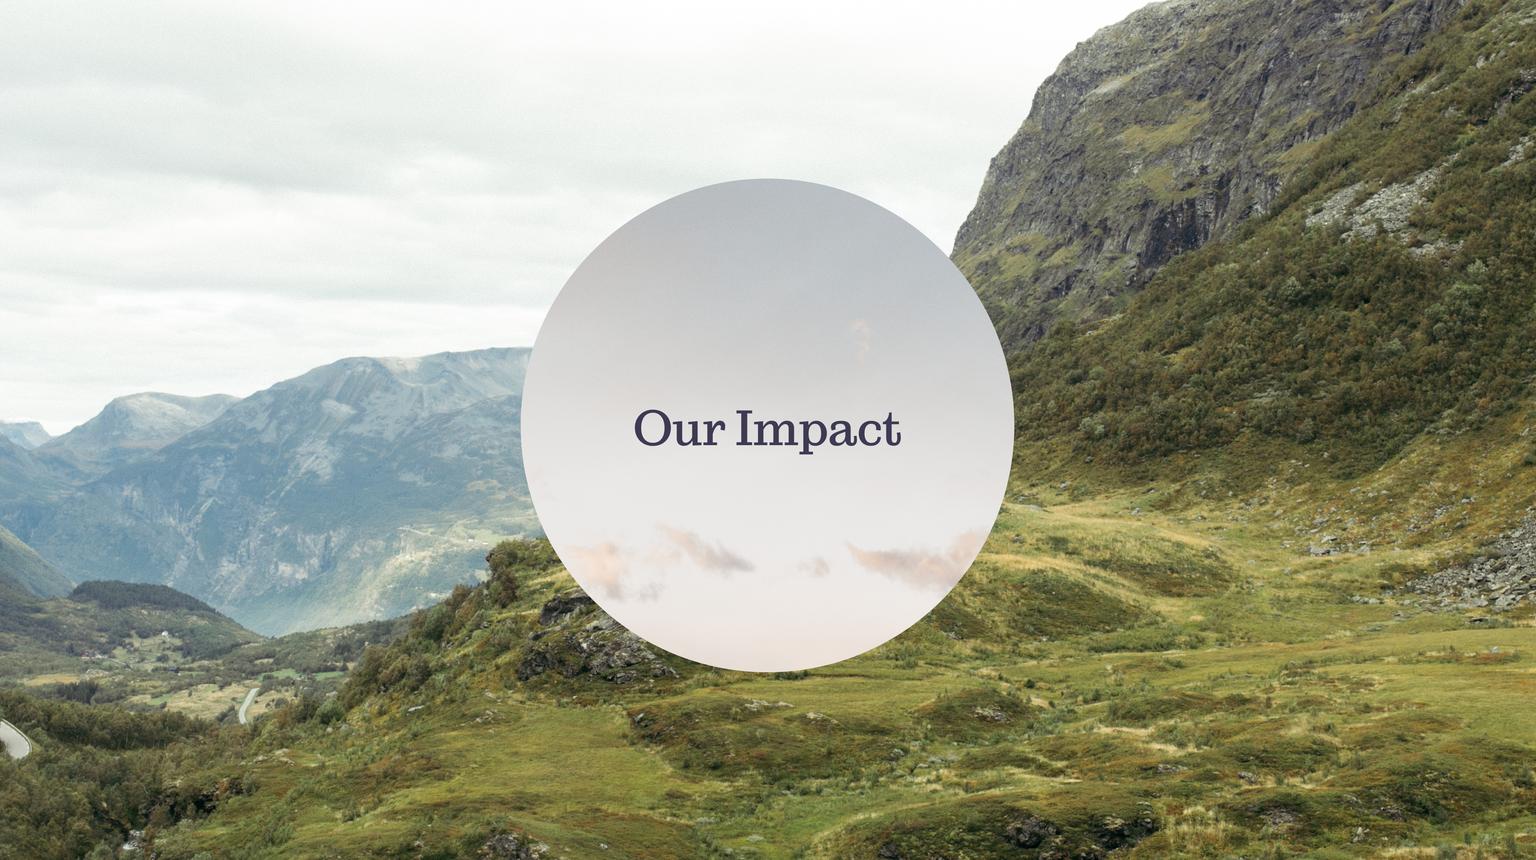 Our Impact - image of green hills and mountains